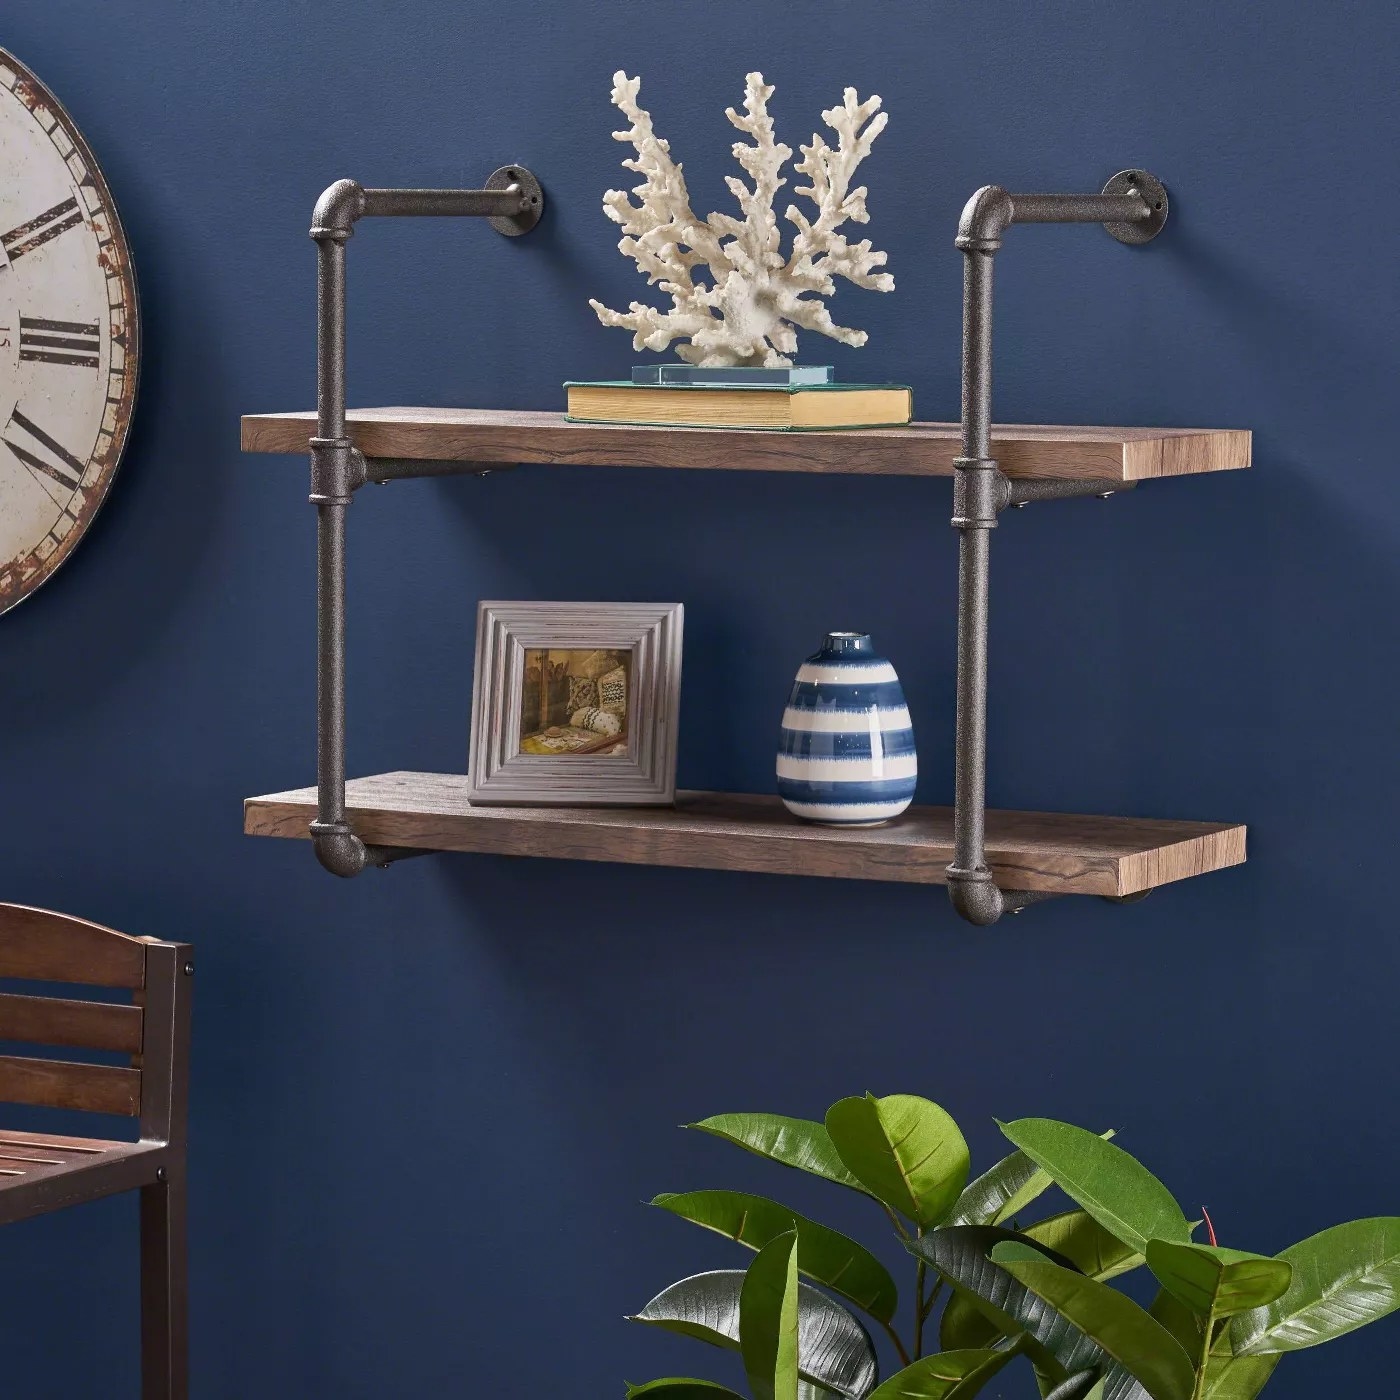 The industrial, wall-mounted shelves